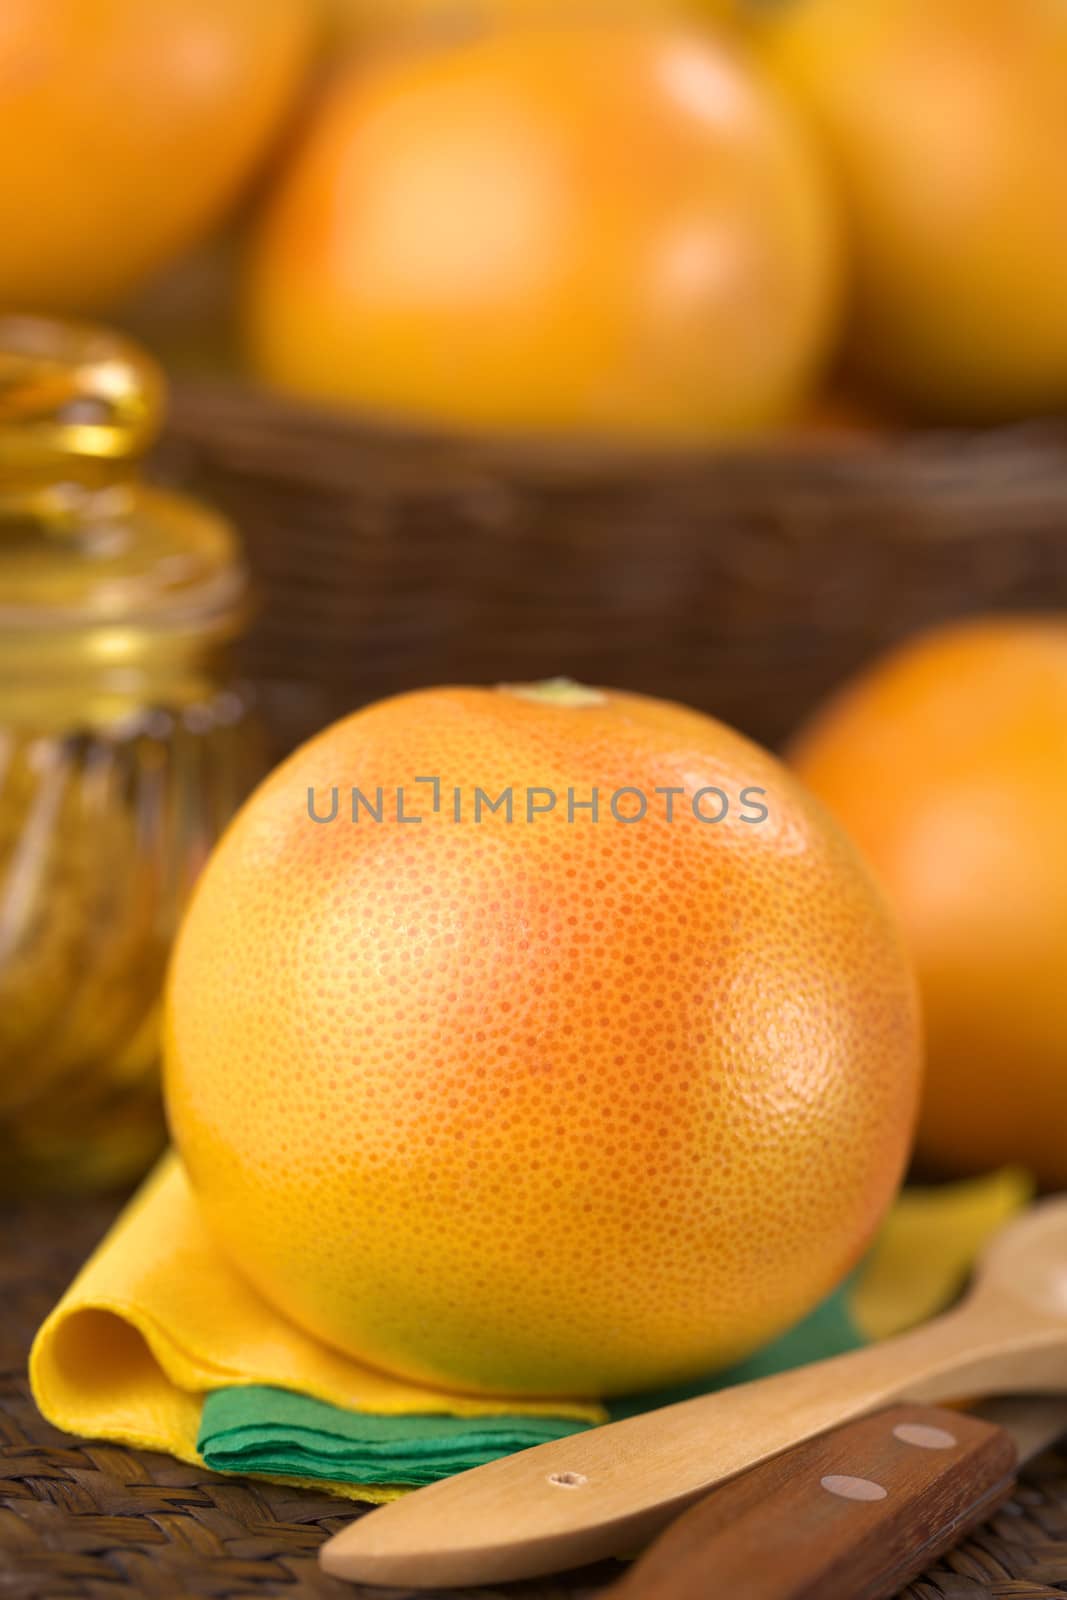 Pink grapefruit on napkins with wooden spoon and knife on the side, sugar and basket in the back (Selective Focus, Focus on the front of the grapefruit)